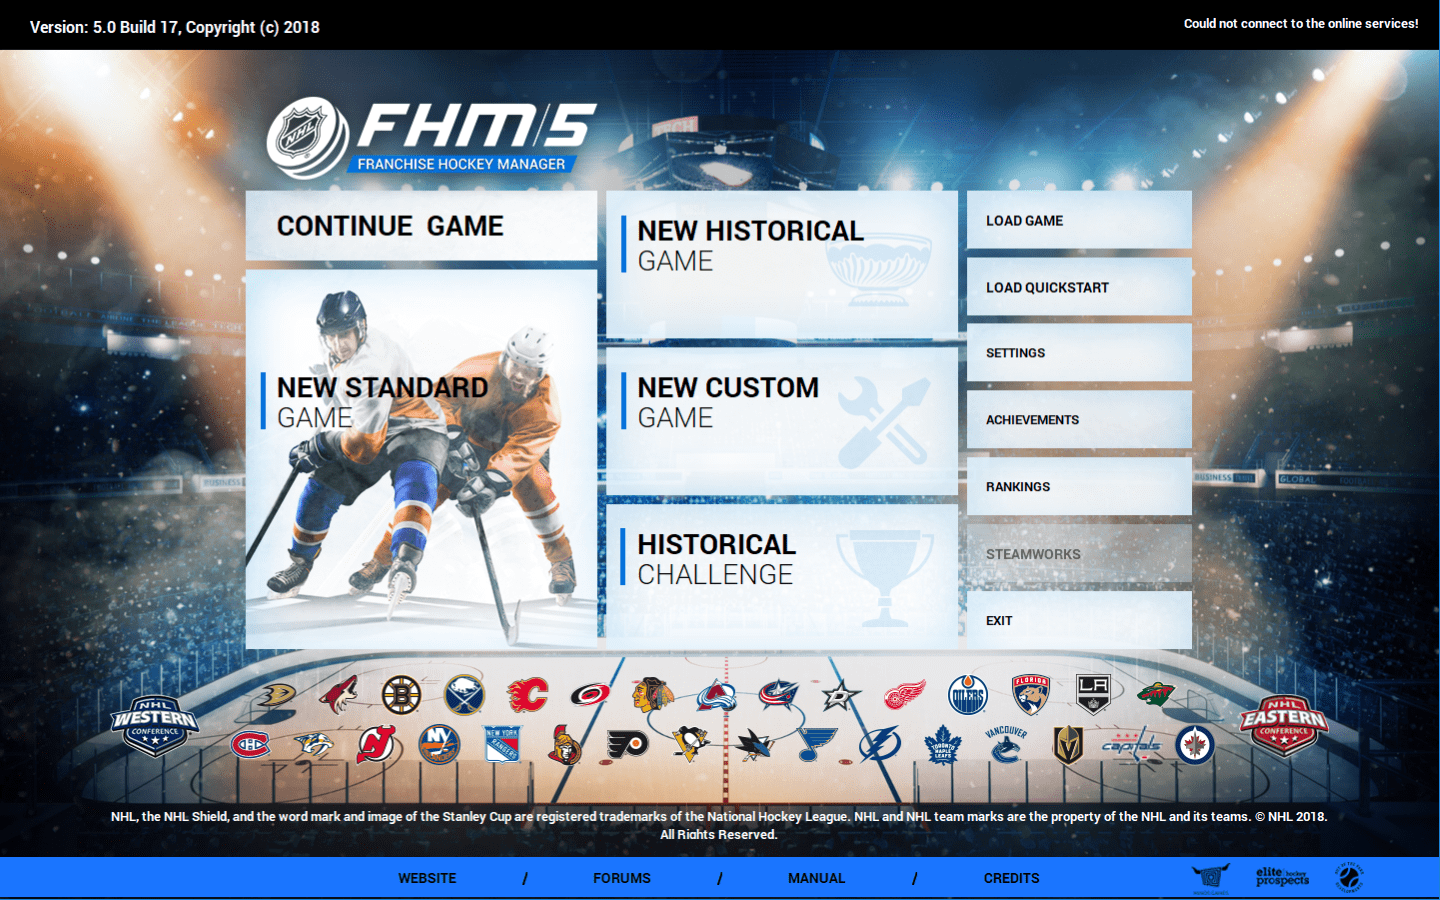 The scoop! Franchise Hockey Manager FHM5 features for this 2019 season (PC, Mac, Linux)